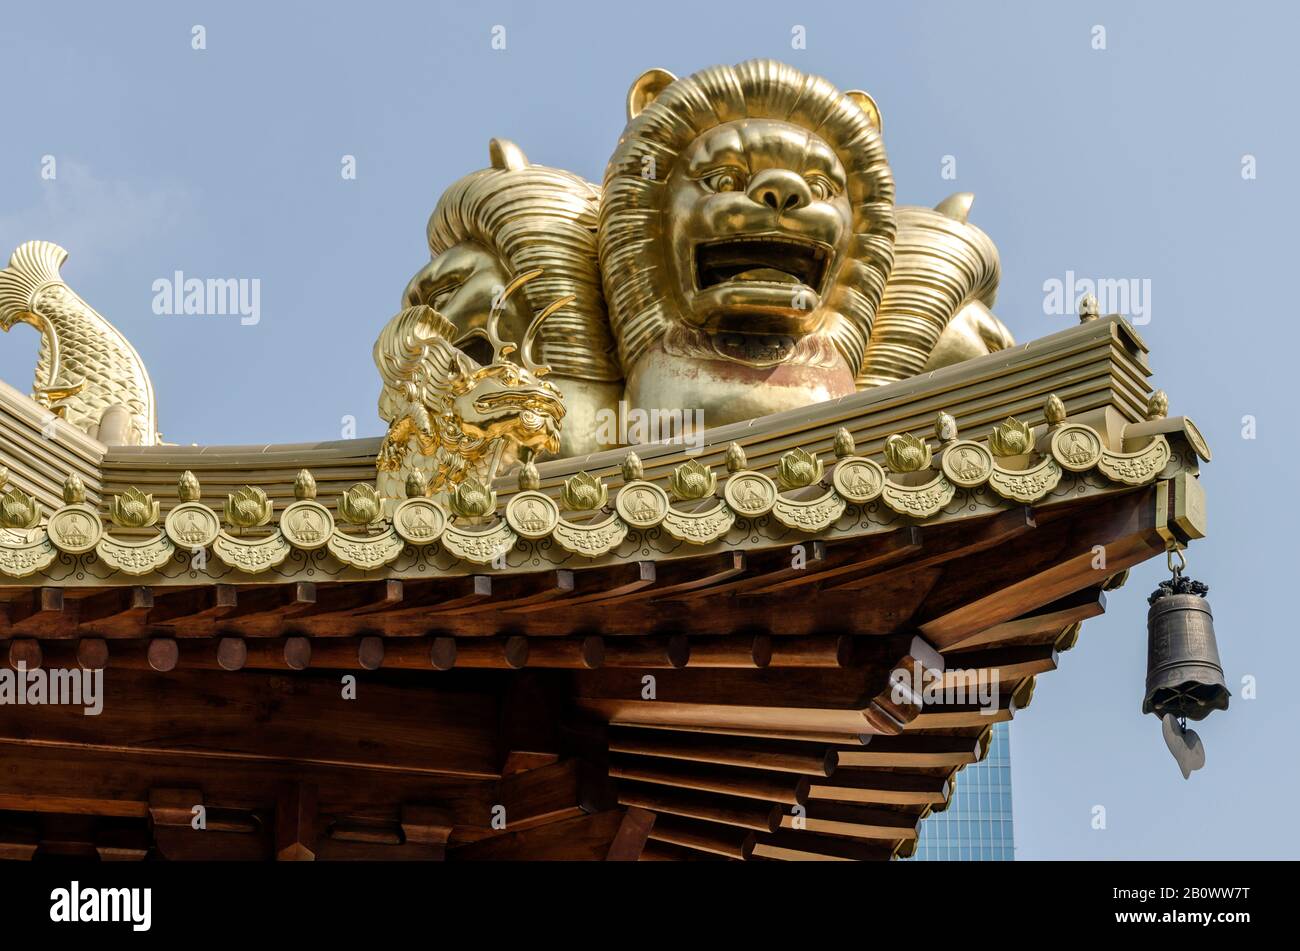 Golden lion heads, Jing'an Temple, Shanghai, China, Asia Stock Photo